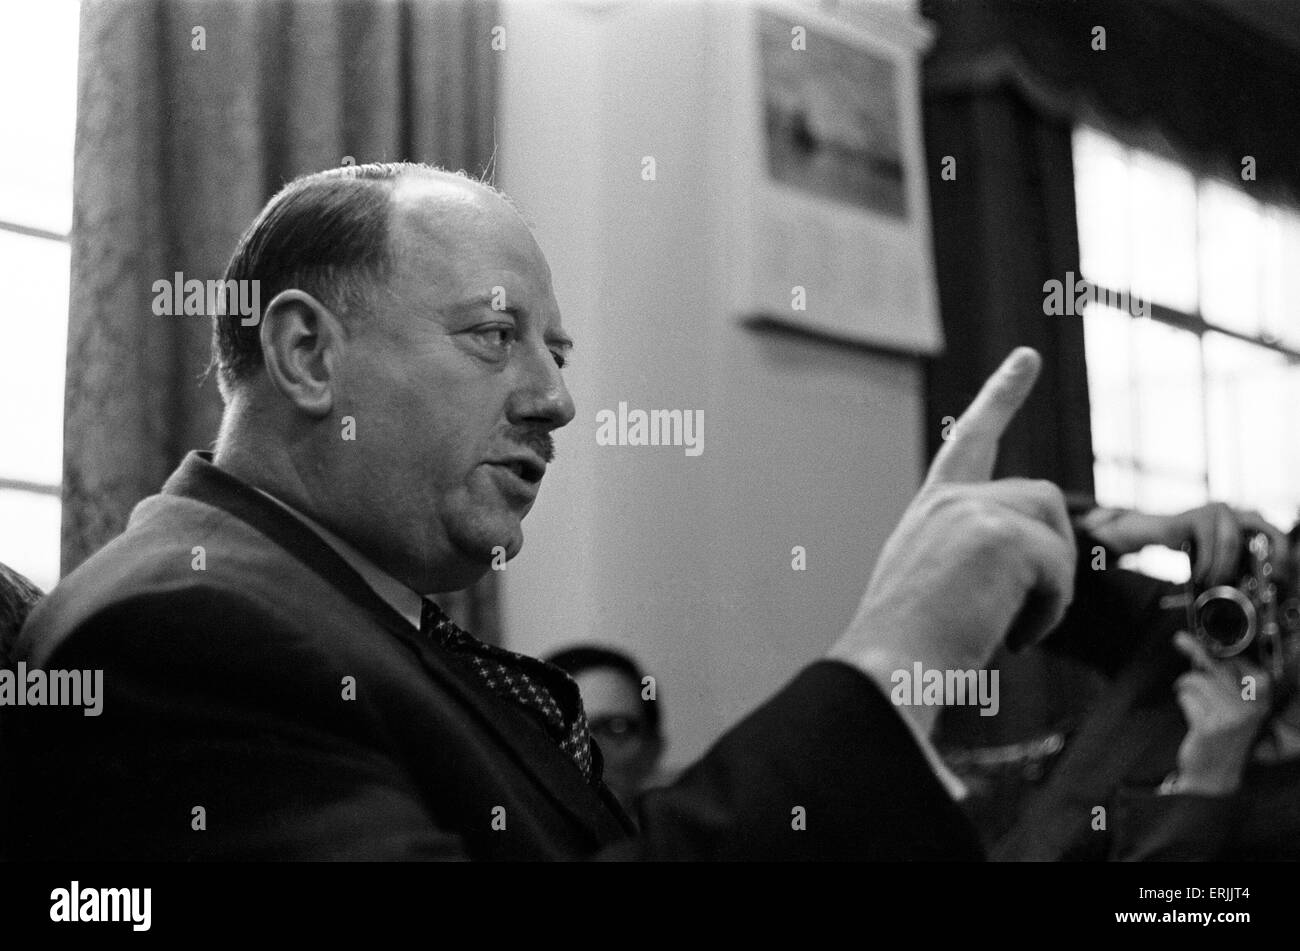 Dr Richard Beeching, Chairman of British Railways, pictured in his office, 15th March 1961. He became a household name in Britain in the early 1960s for his report 'The Reshaping of British Railways', commonly referred to as 'The Beeching Report', which led to far- reaching changes in the railway network, popularly known as the Beeching Axe. Source Wikipedia. Stock Photo